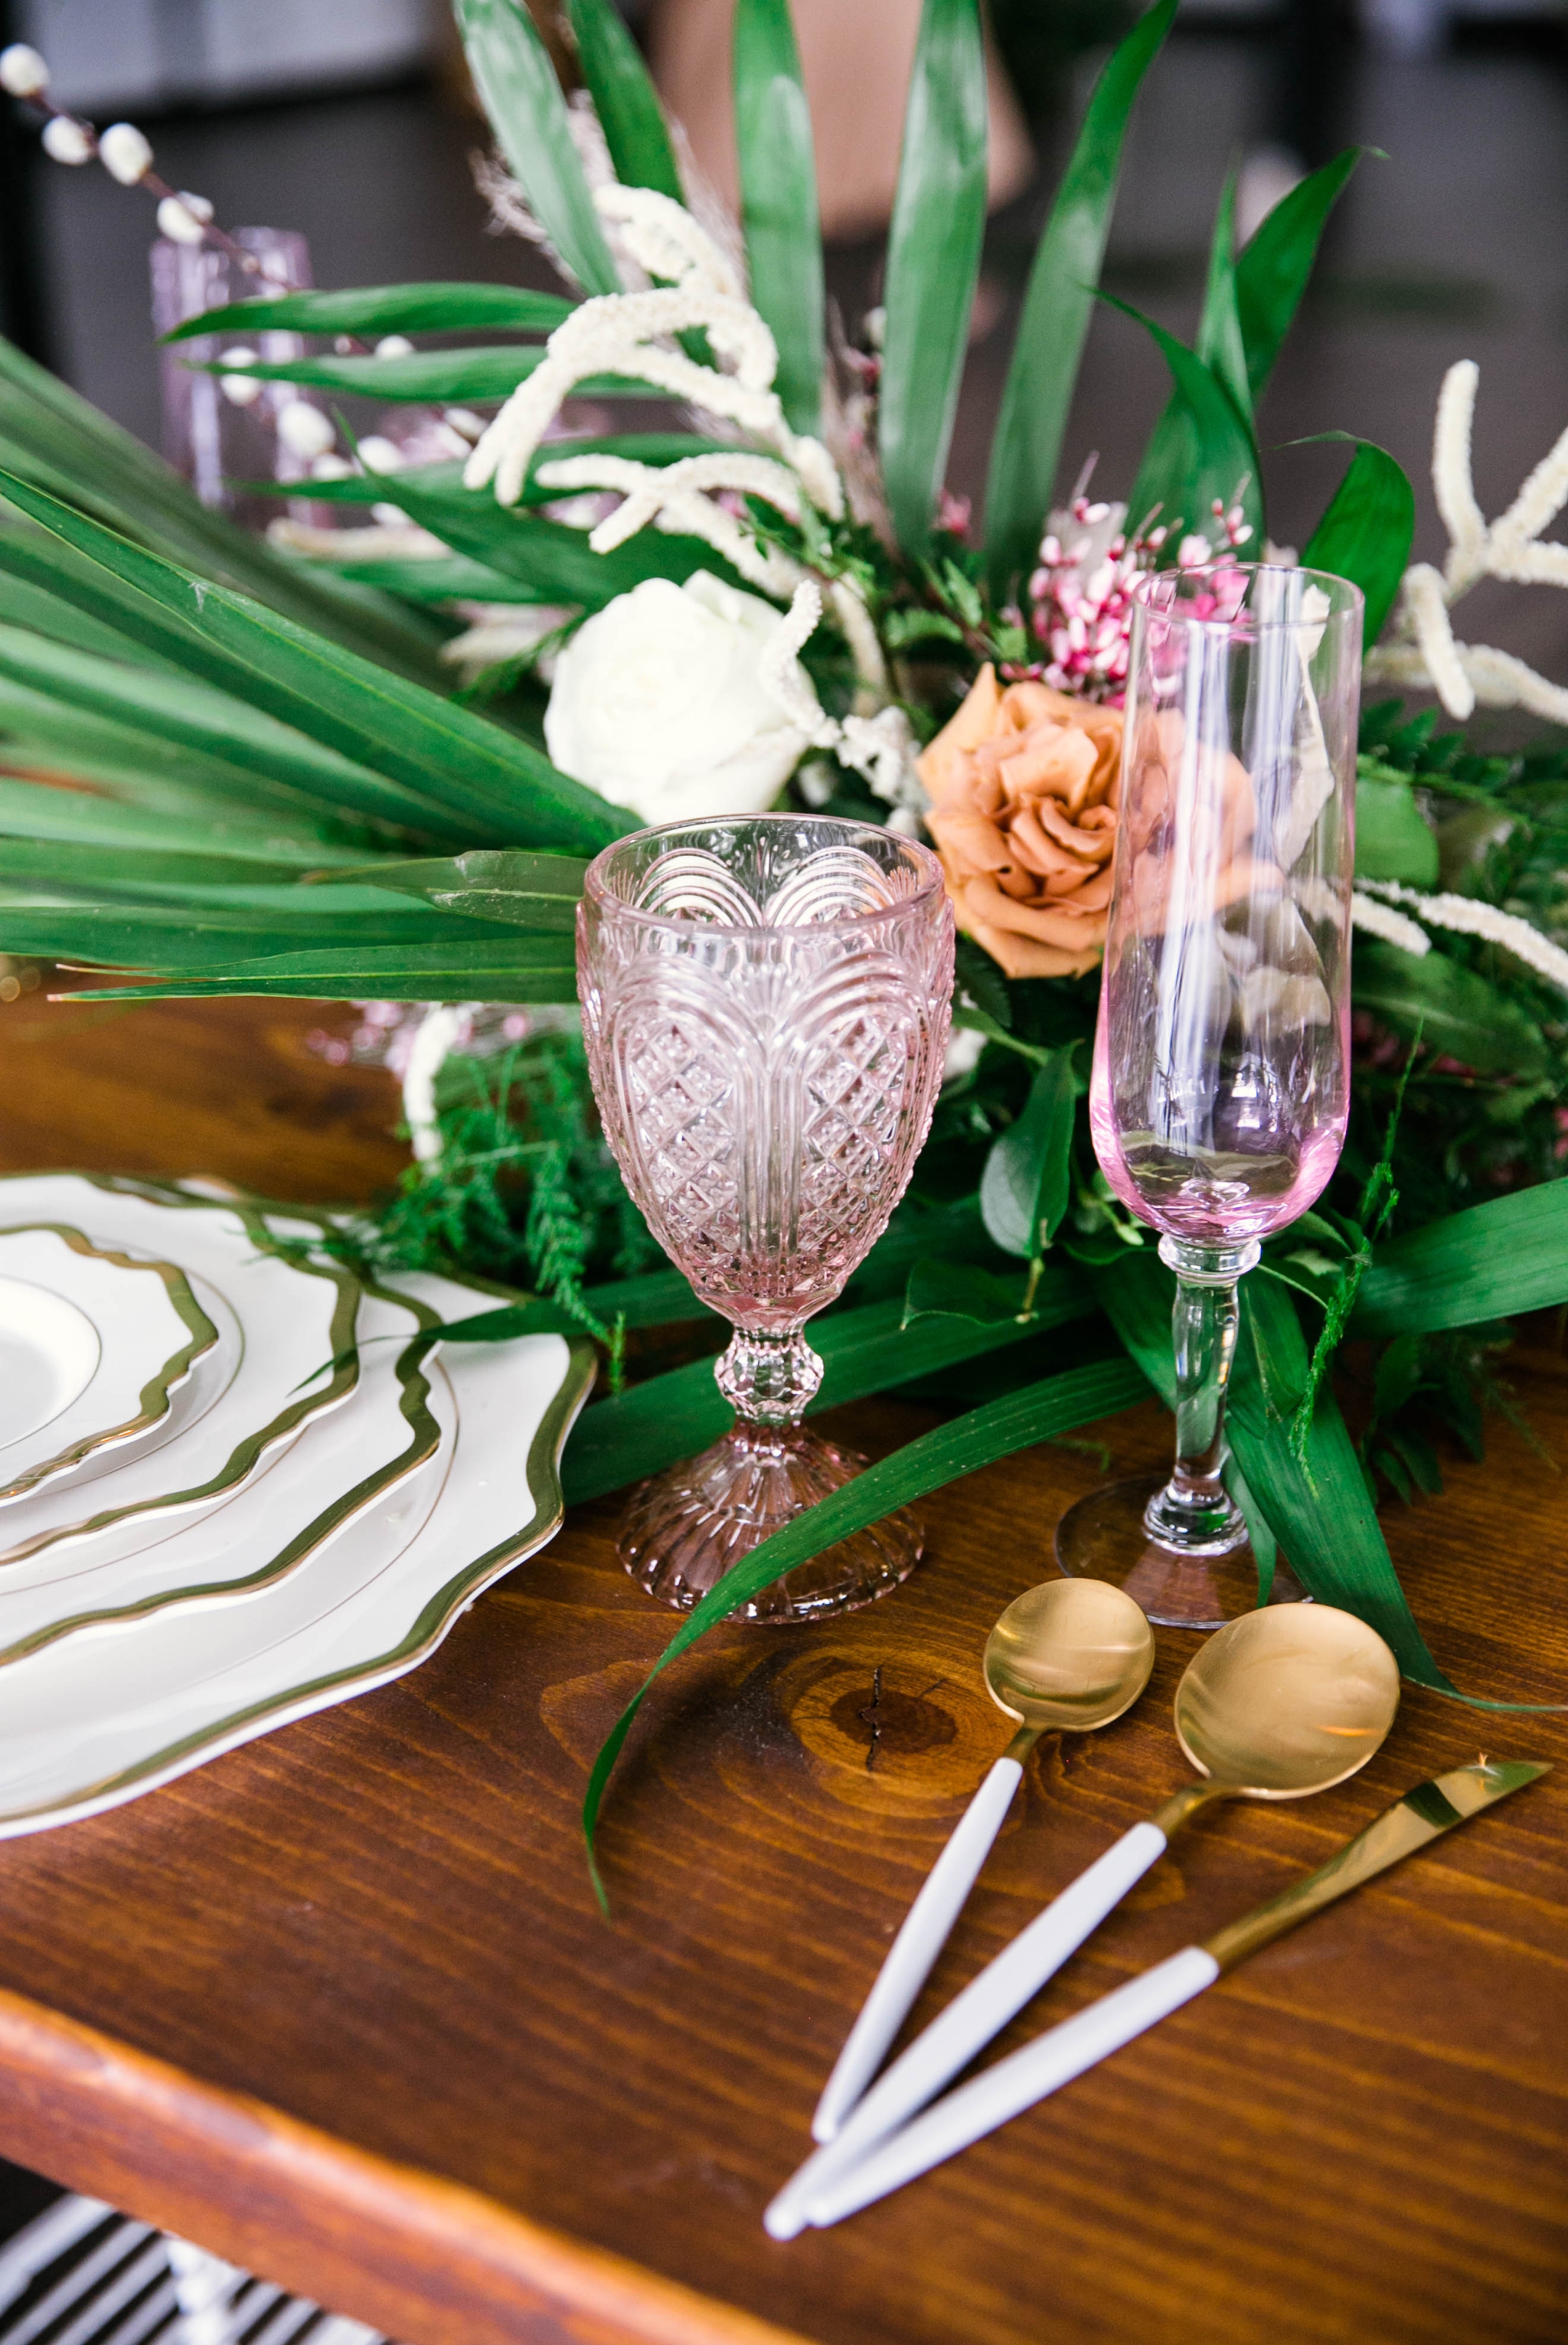 Wedding Table Setting with white and gold plates, pink glass wear, gold and white silverware - Tropical Destination Wedding Inspiration - Honolulu, Oahu, Hawaii Photographer